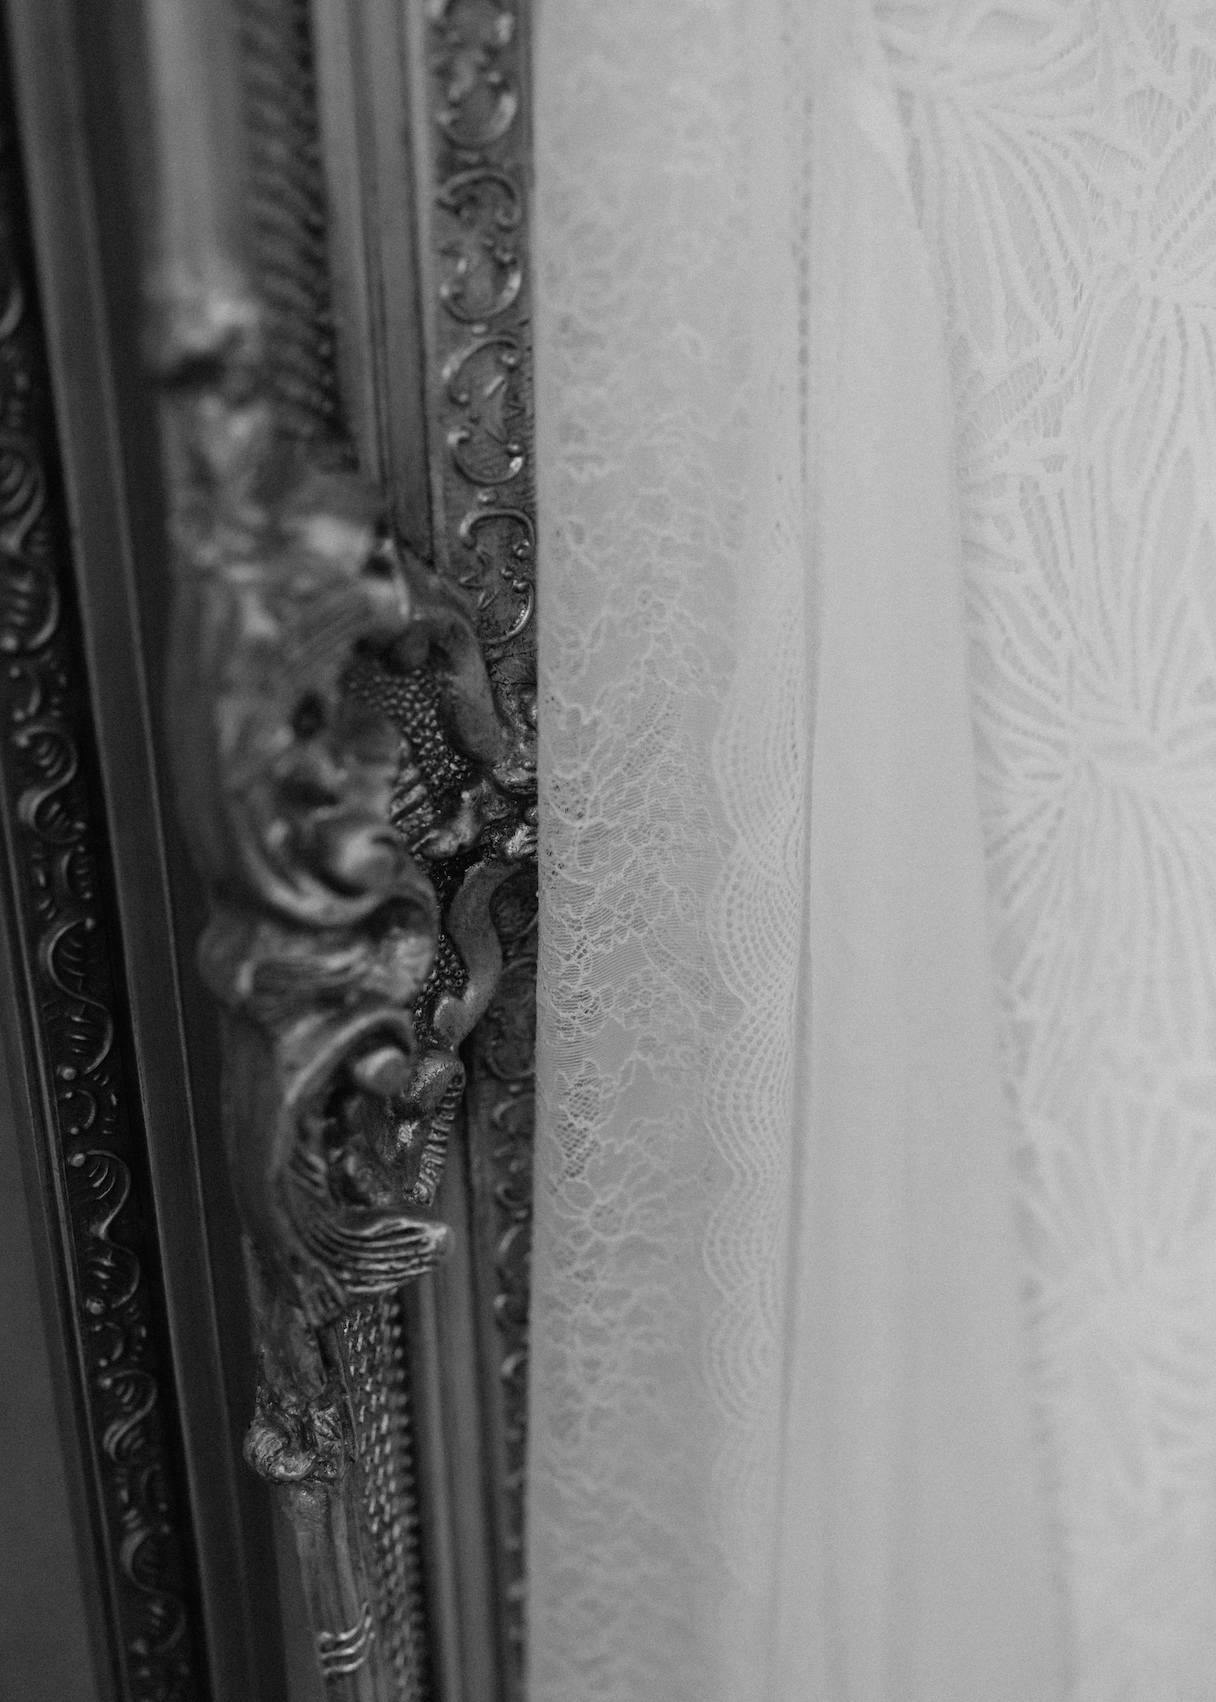 Black and white close-up of an ornate vintage frame next to a delicate lace fabric. The frame features intricate carvings, and the lace shows a subtle floral pattern, emphasizing the textures and details of both materials.